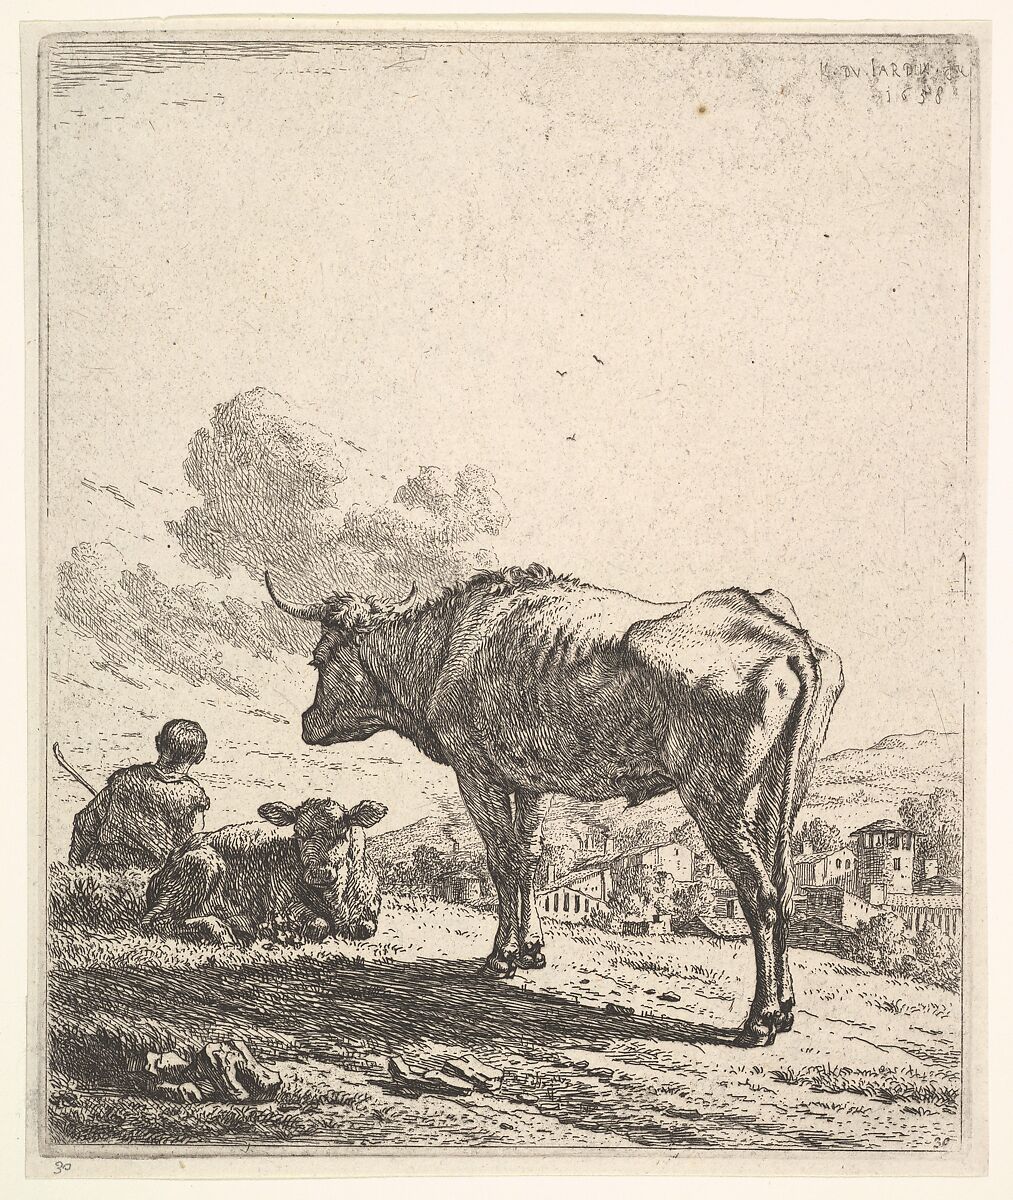 Cowherd with cow and calf on a hillside, the cowherd viewed from behind and seated in the grass, the cow standing and facing the recumbent calf, a village beyond, Karel Dujardin (Dutch, Amsterdam 1622–1678 Venice), Etching 